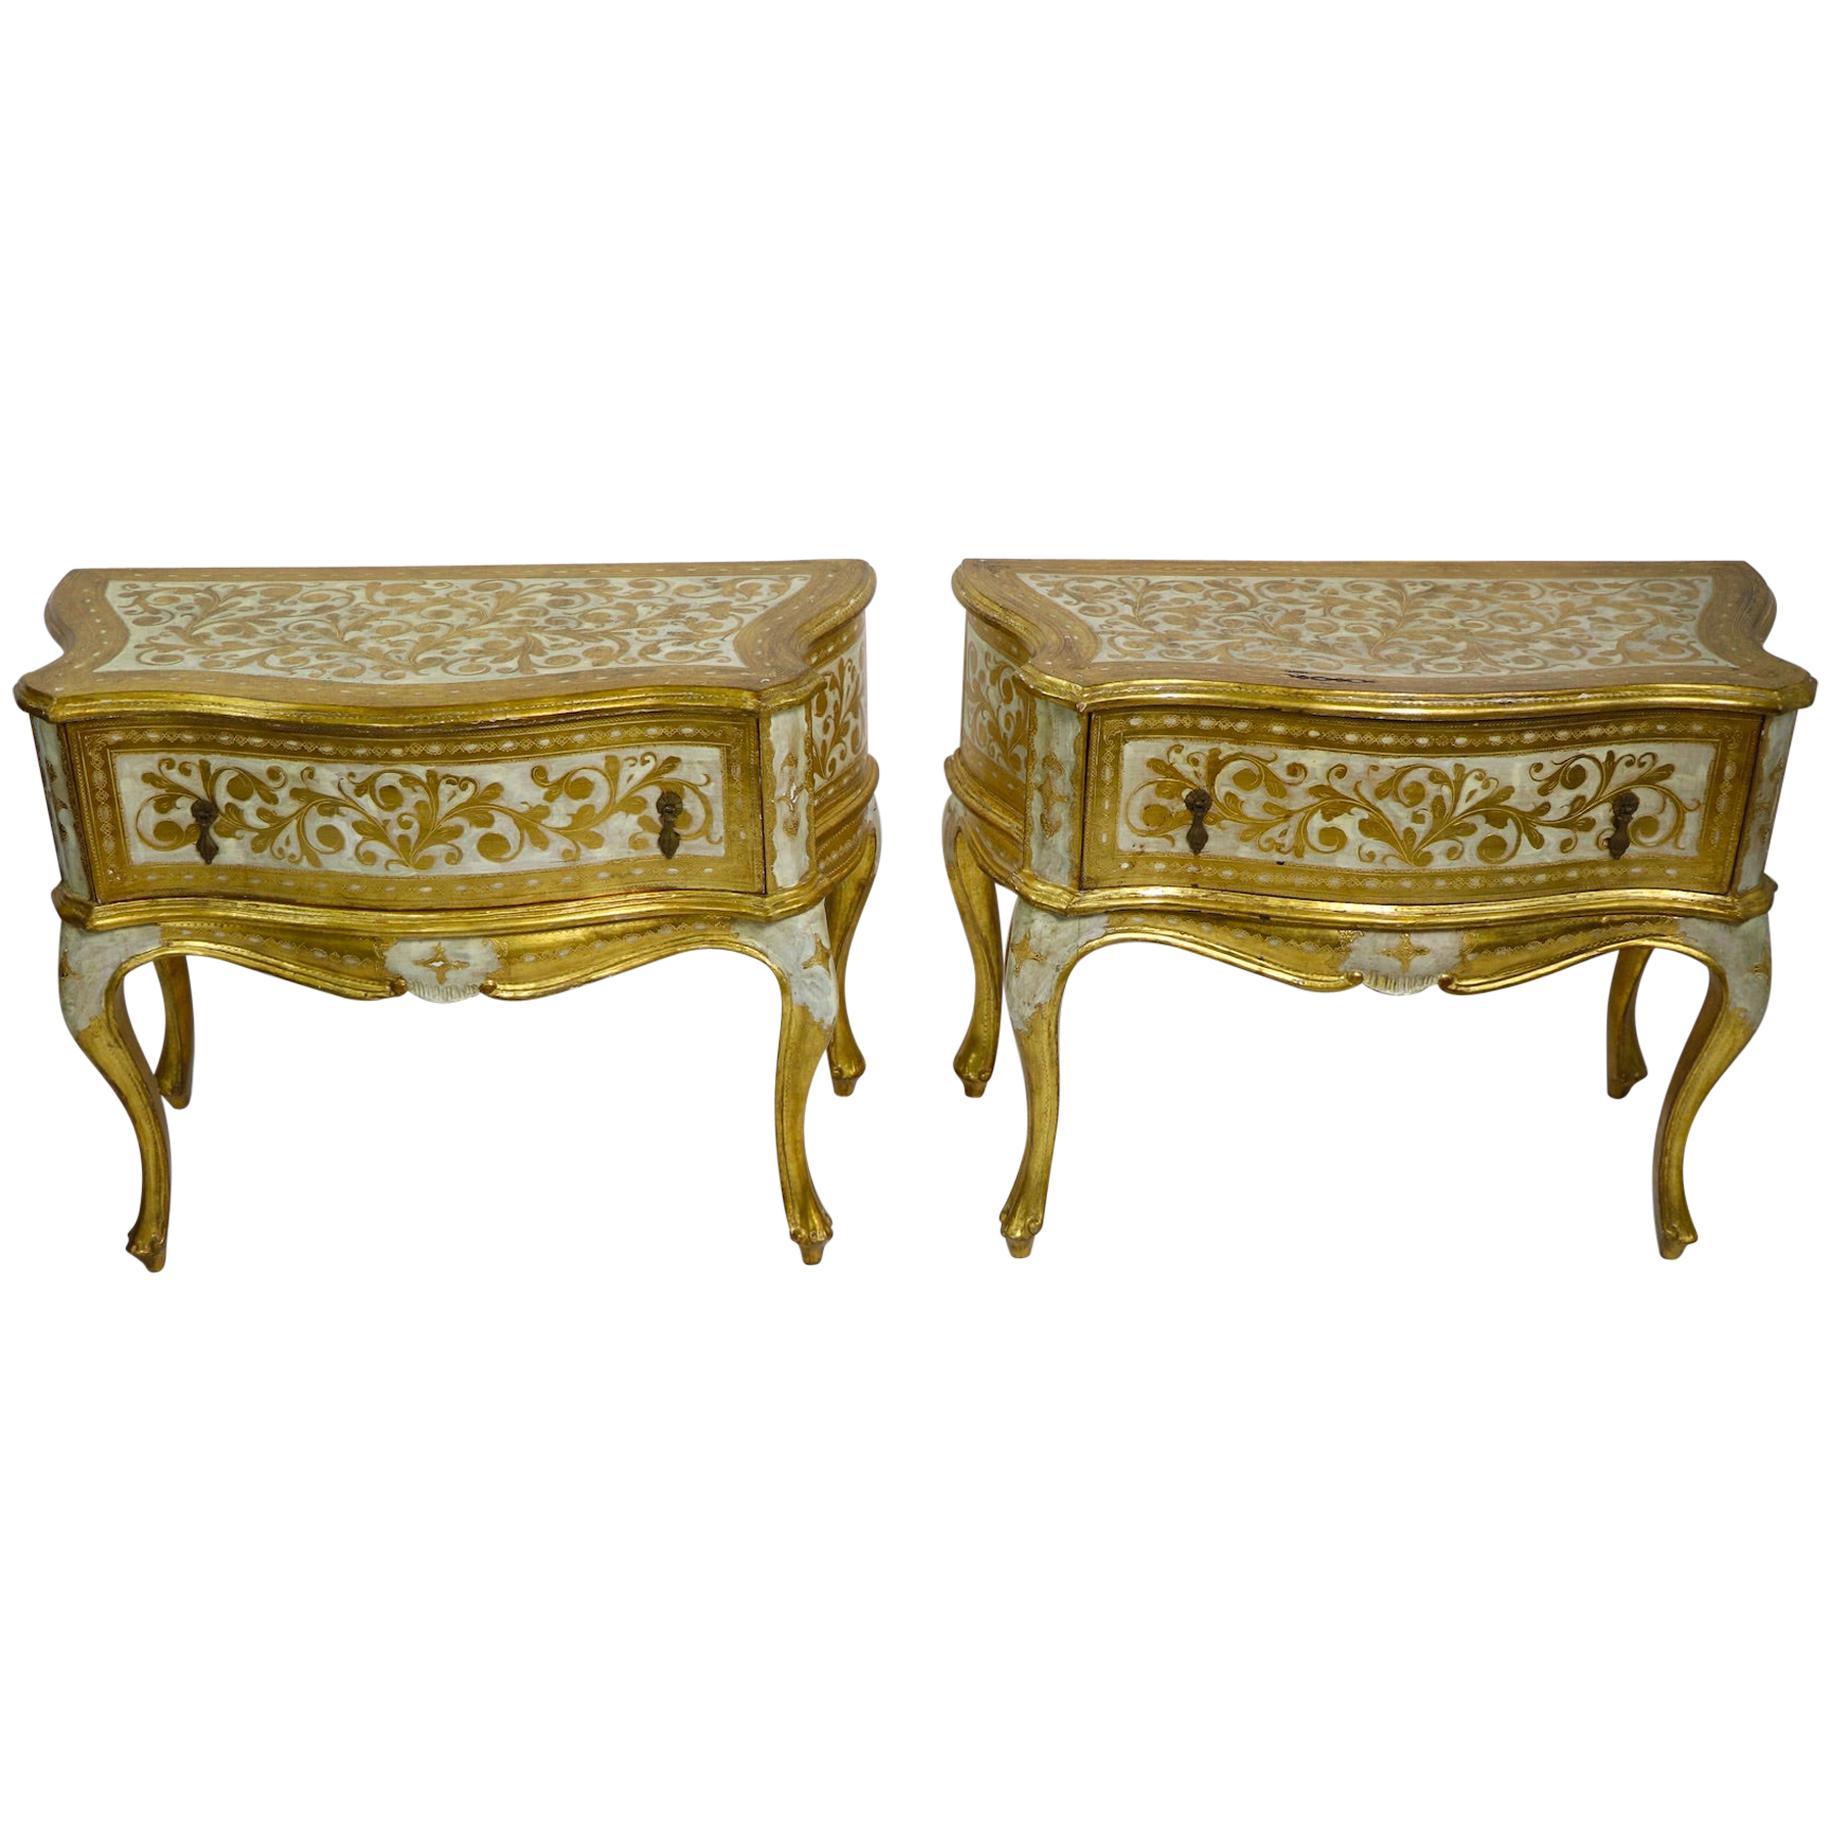 Pair of Giltwood Nightstands Made in Italy by Florentine Furniture